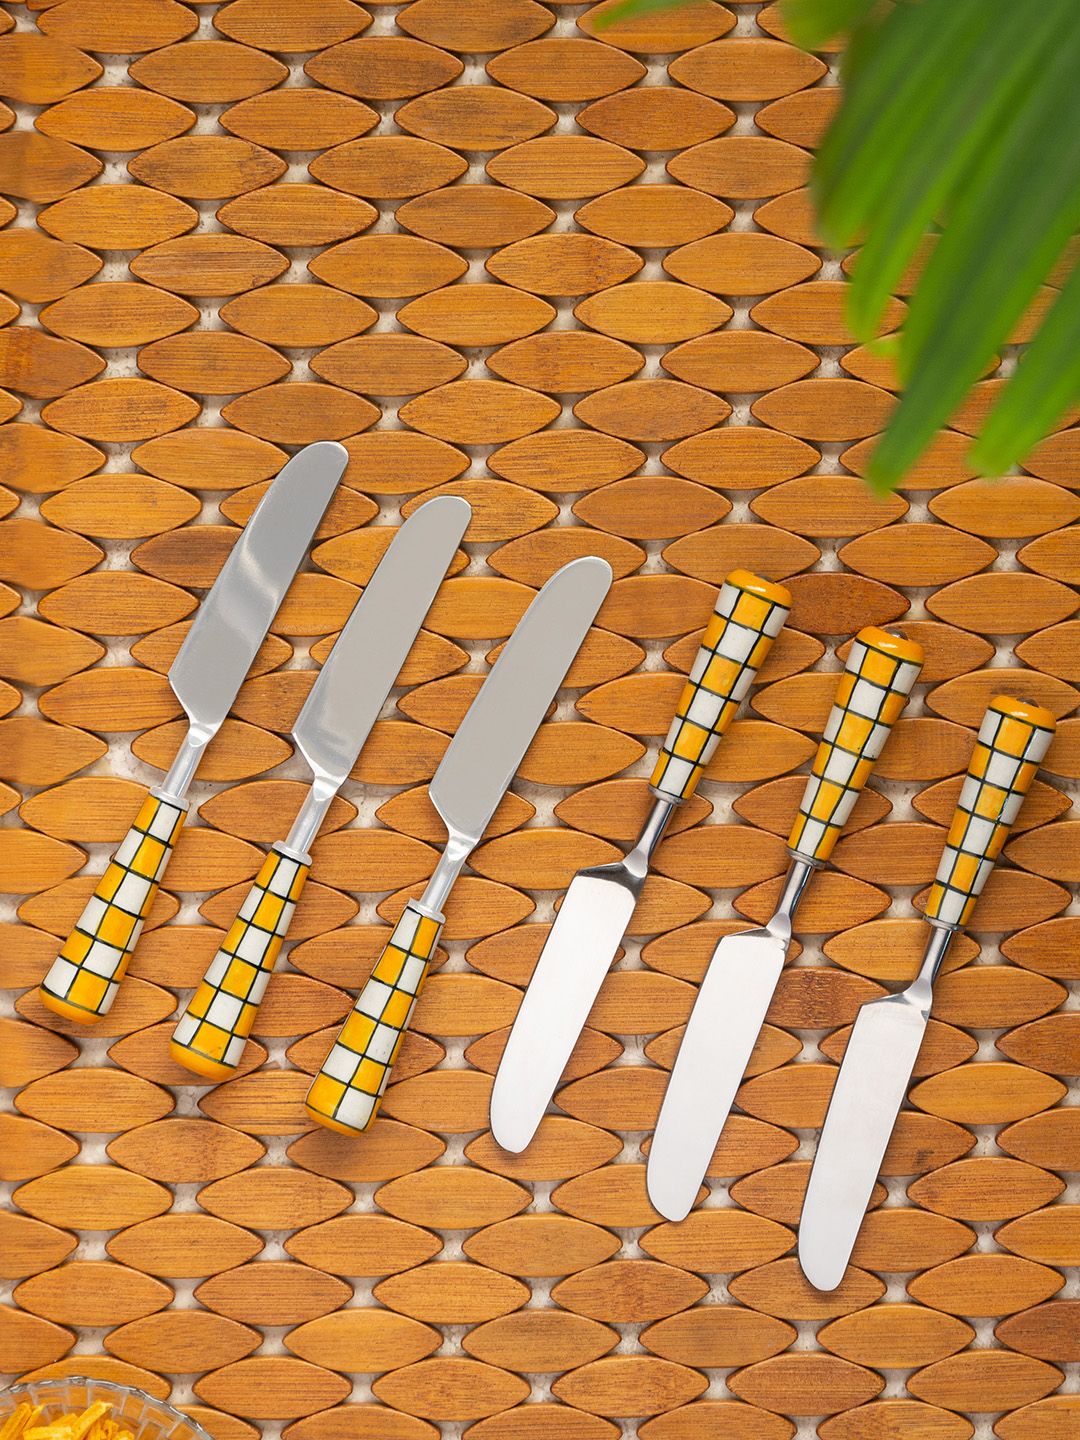 ExclusiveLane Set Of 6 Yellow & White Hand-Painted Stainless Steel table Knives Price in India